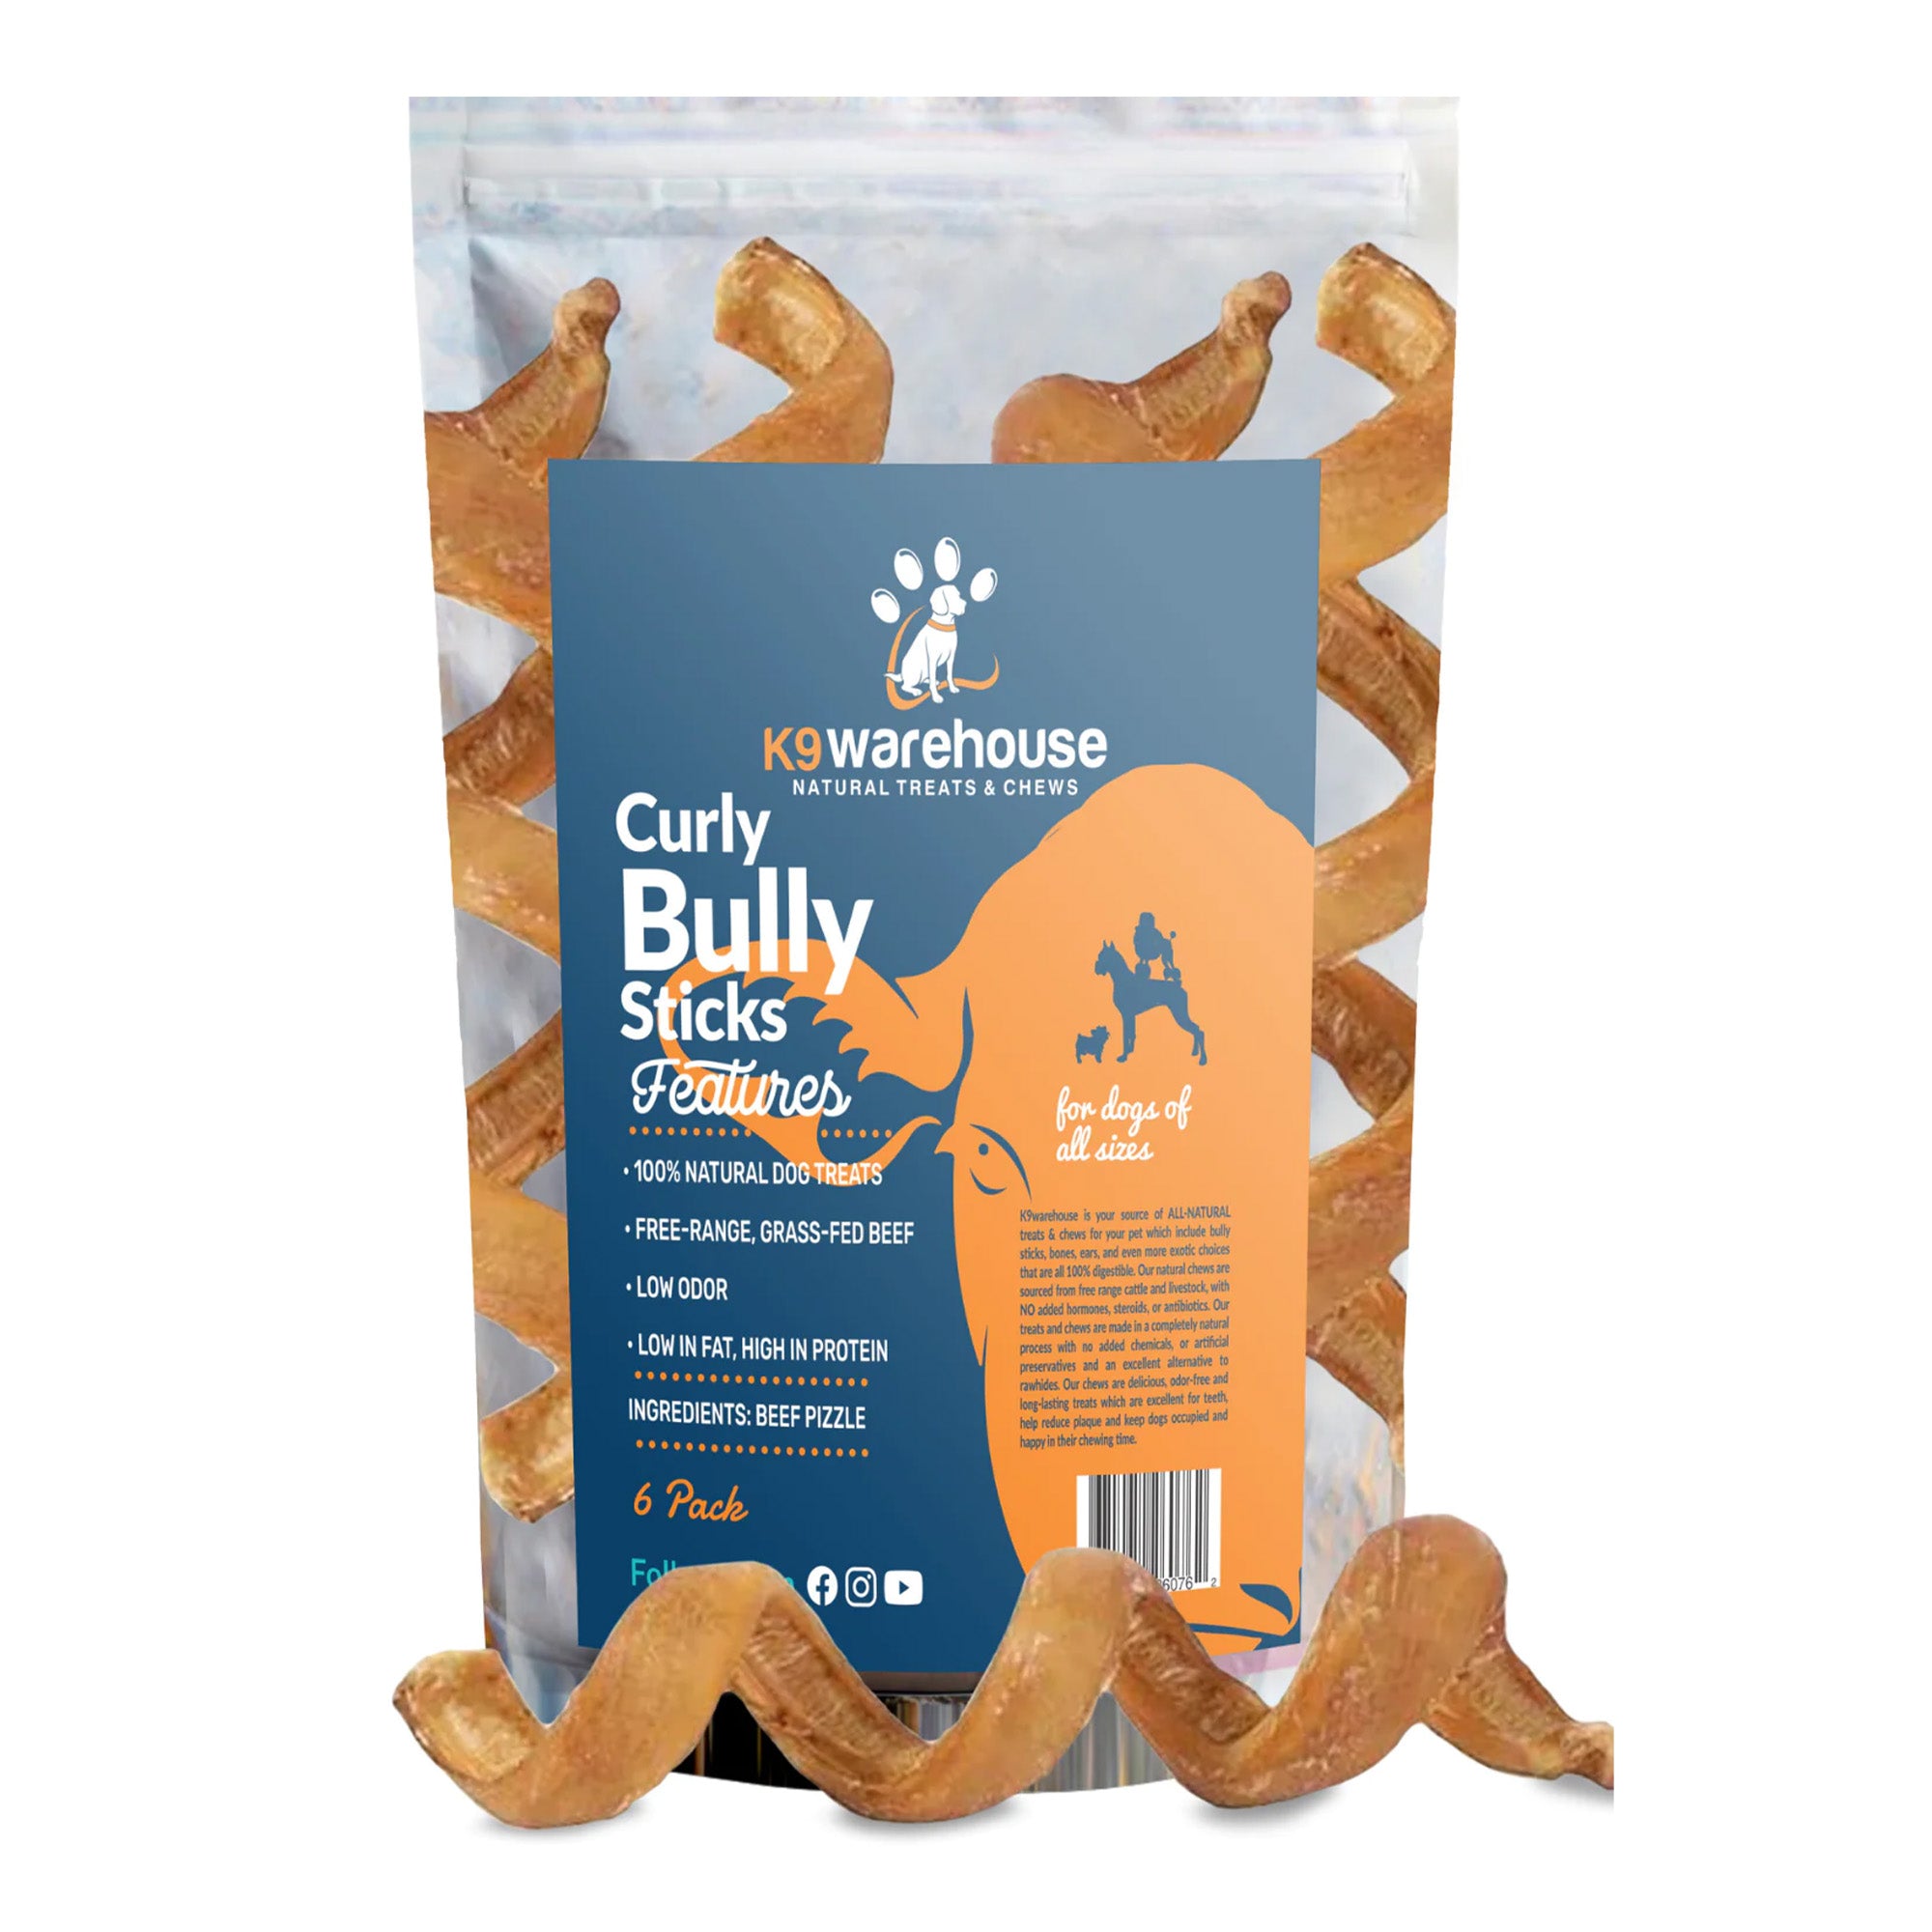 Bully Stick Springs Curly - 6 Pack - Bully Stick Springs Curly - 6 Pack - K9warehouse.com